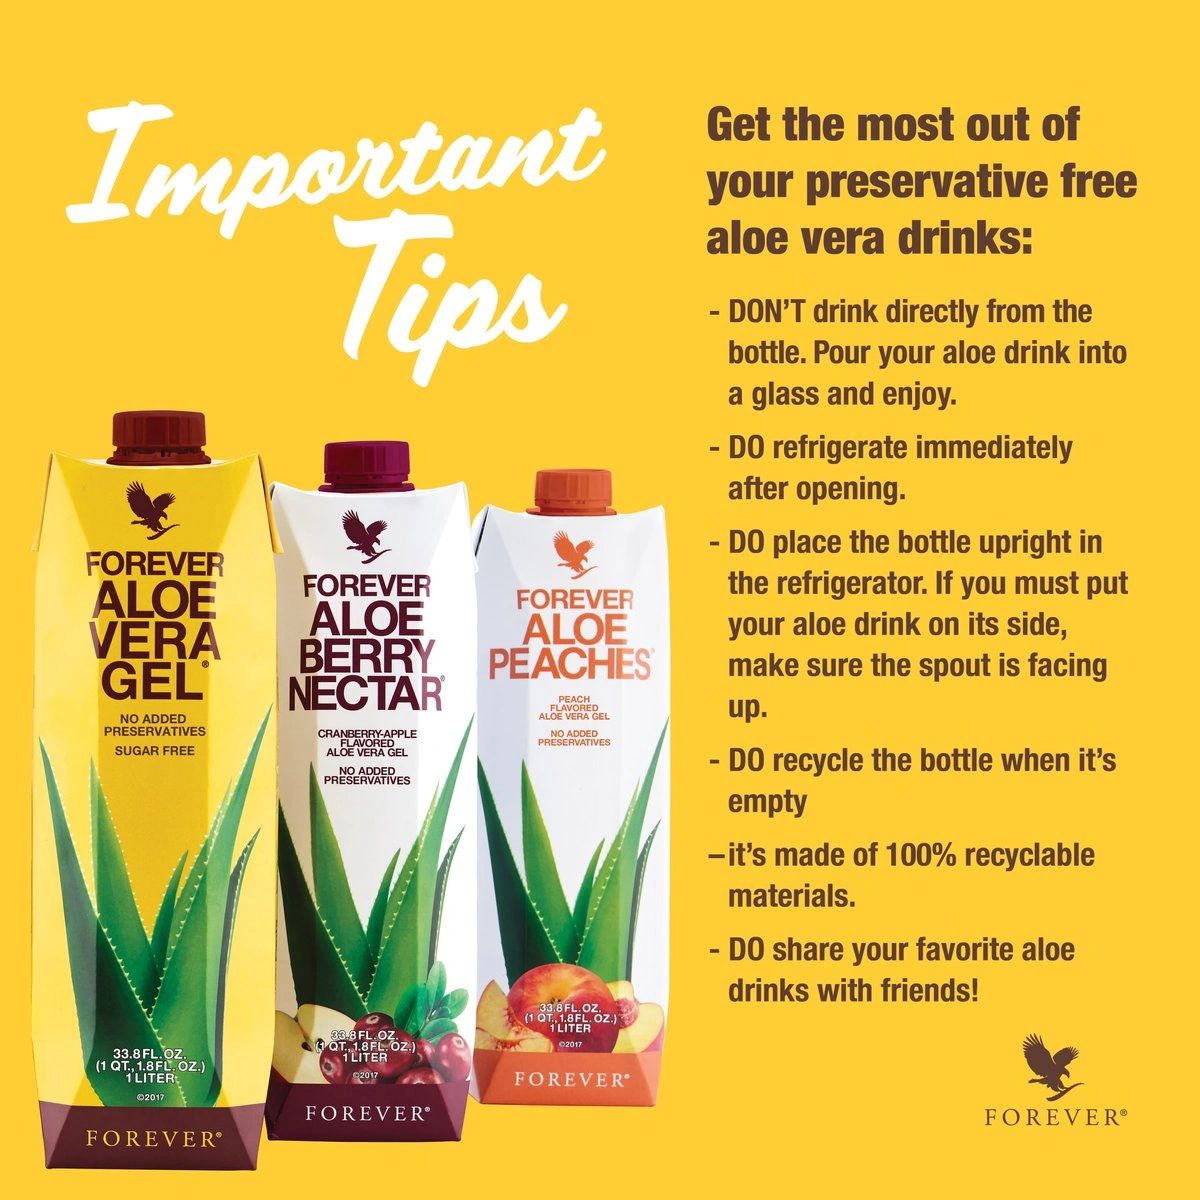 stave Ministerium Fatal How to get the most of your preservative free Aloe vera drinks?